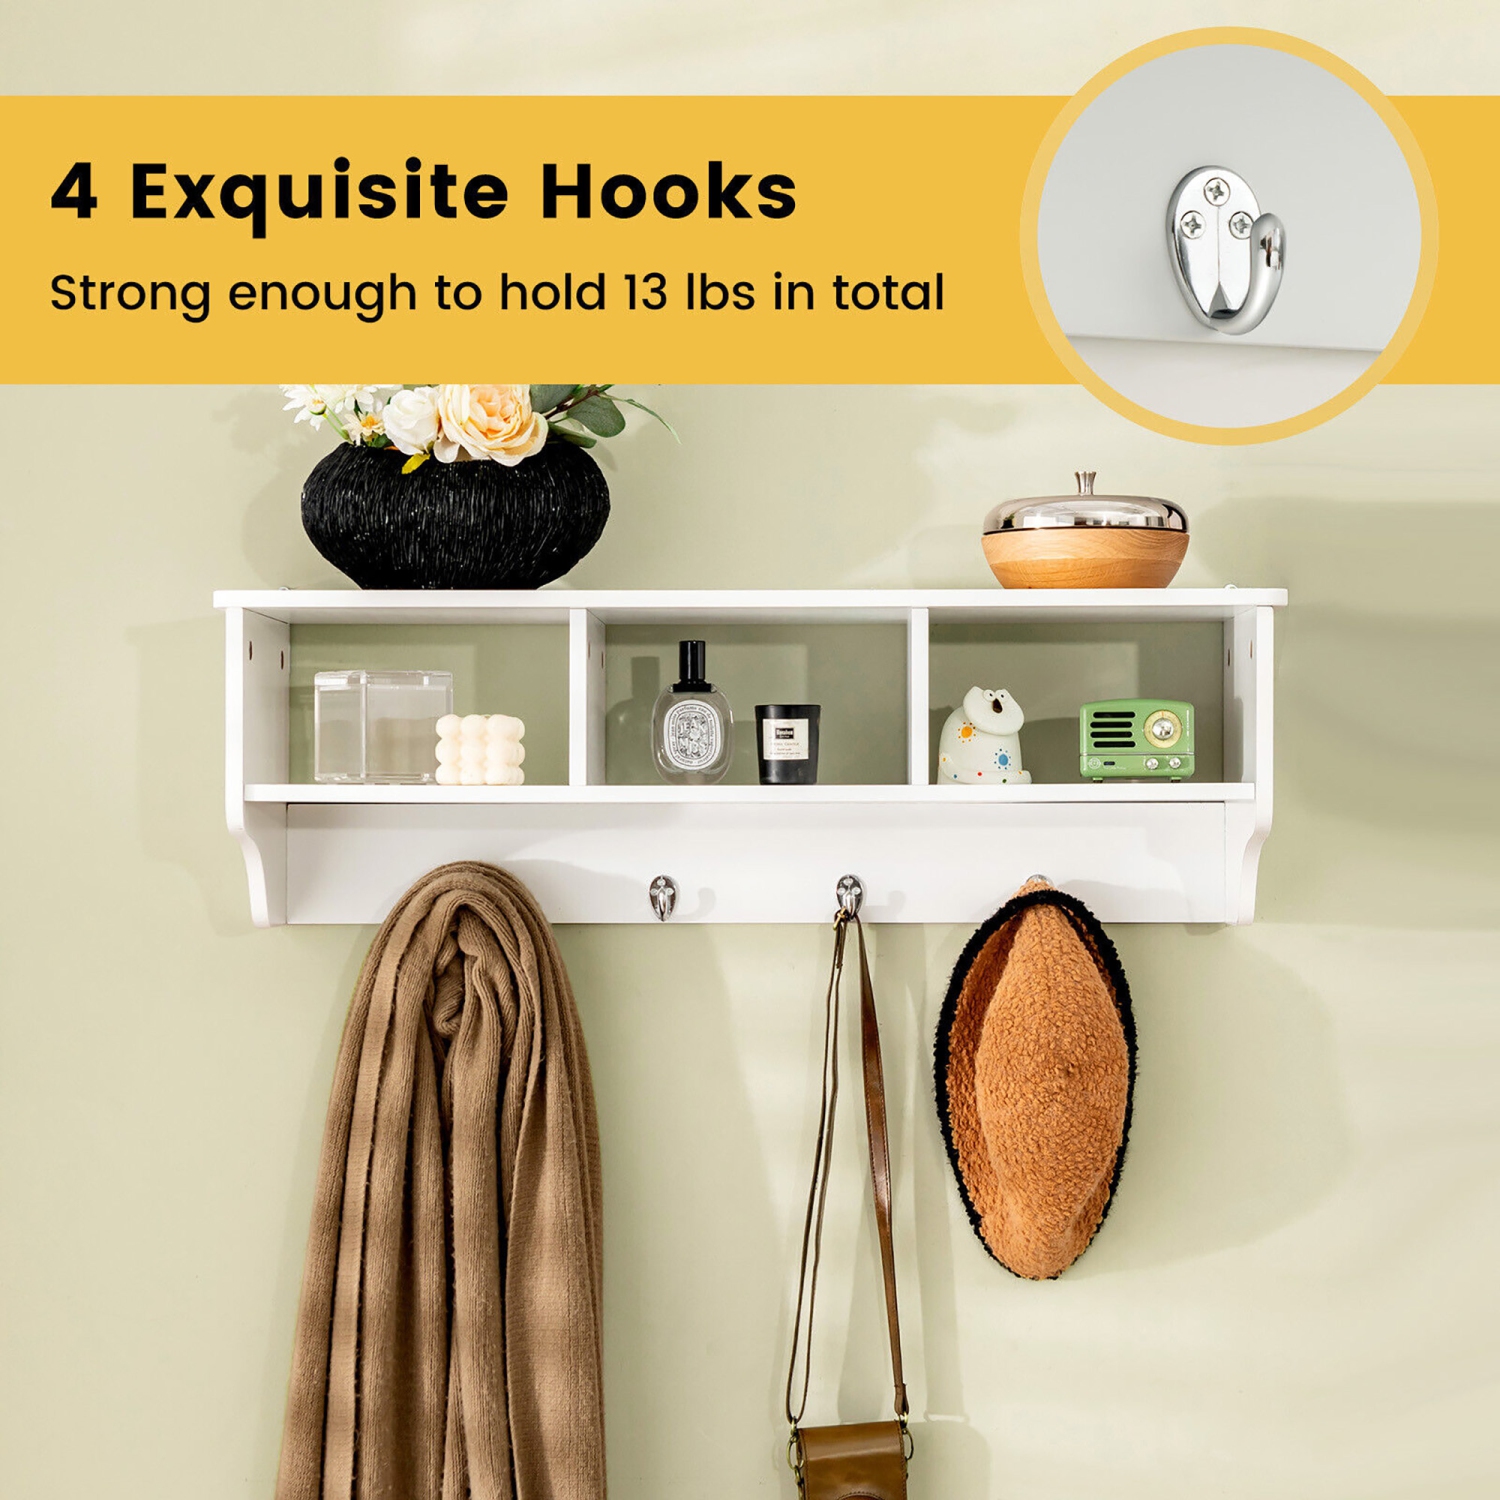 Gymax Versatile Wall-Mounted Coat Rack Space Saver w/ Wide and Flat Shelf